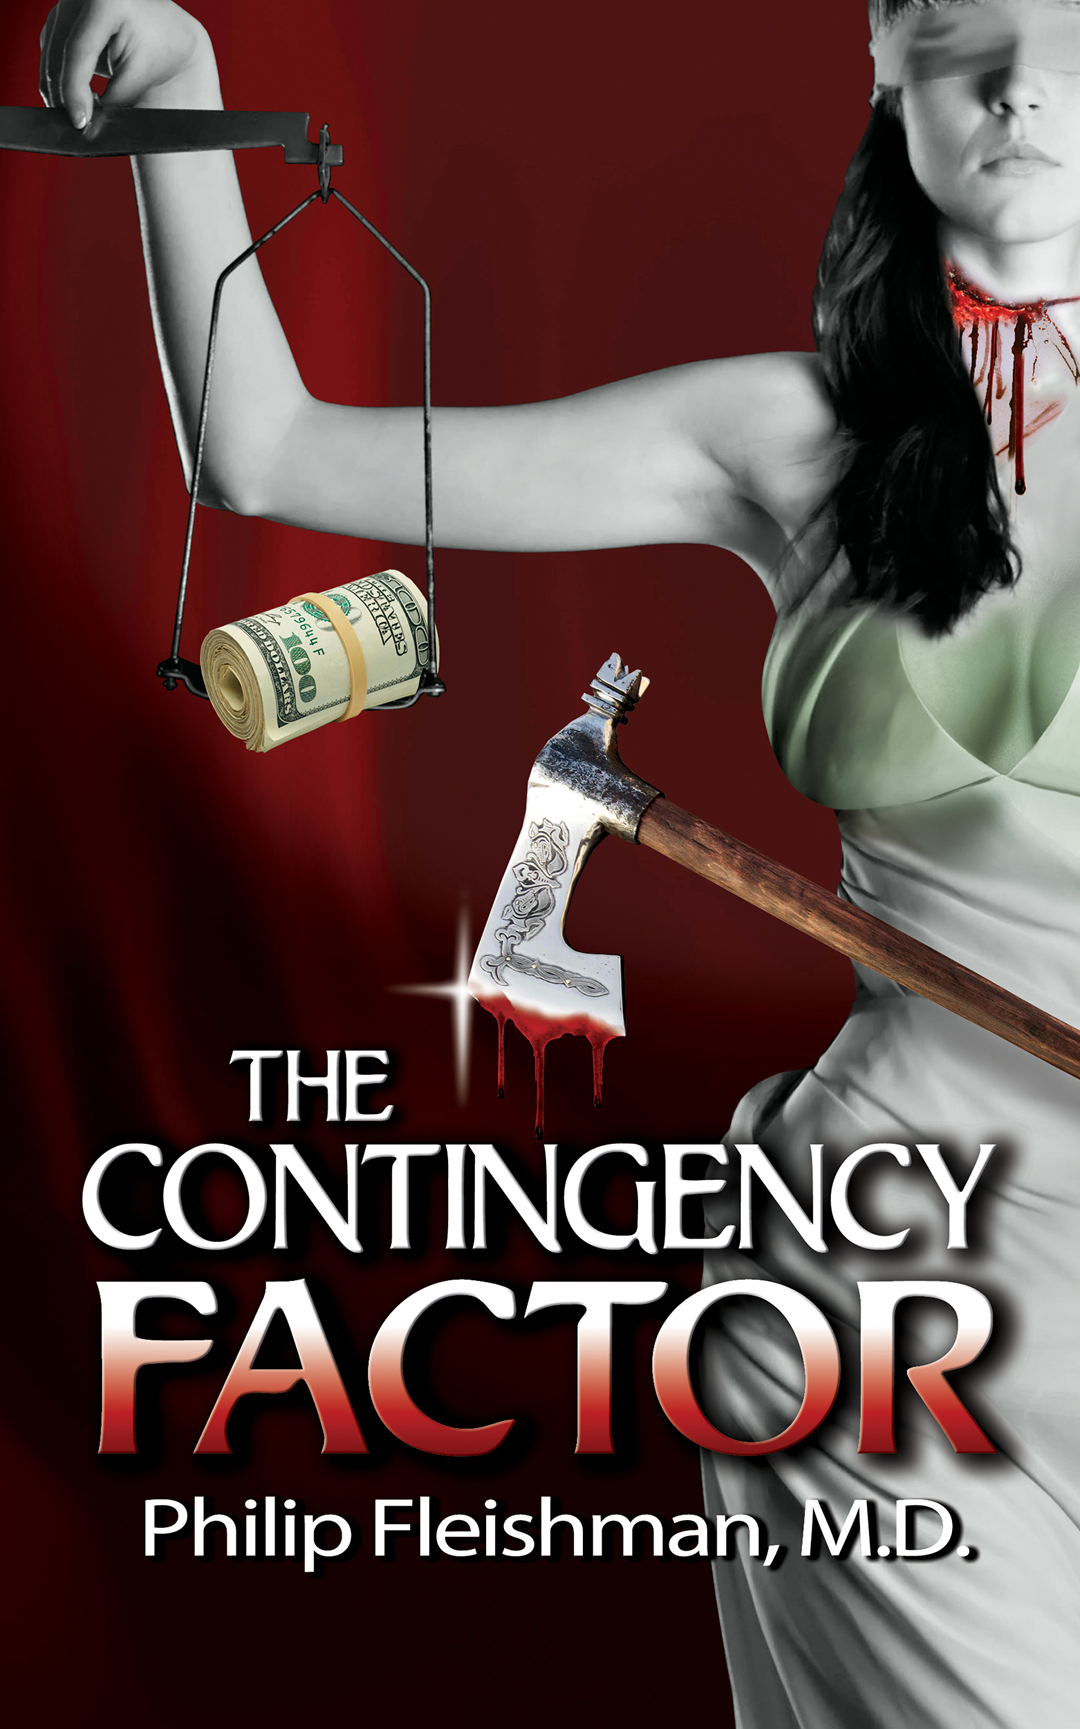 The Contingency Factor by Philip Fleishman M.D.